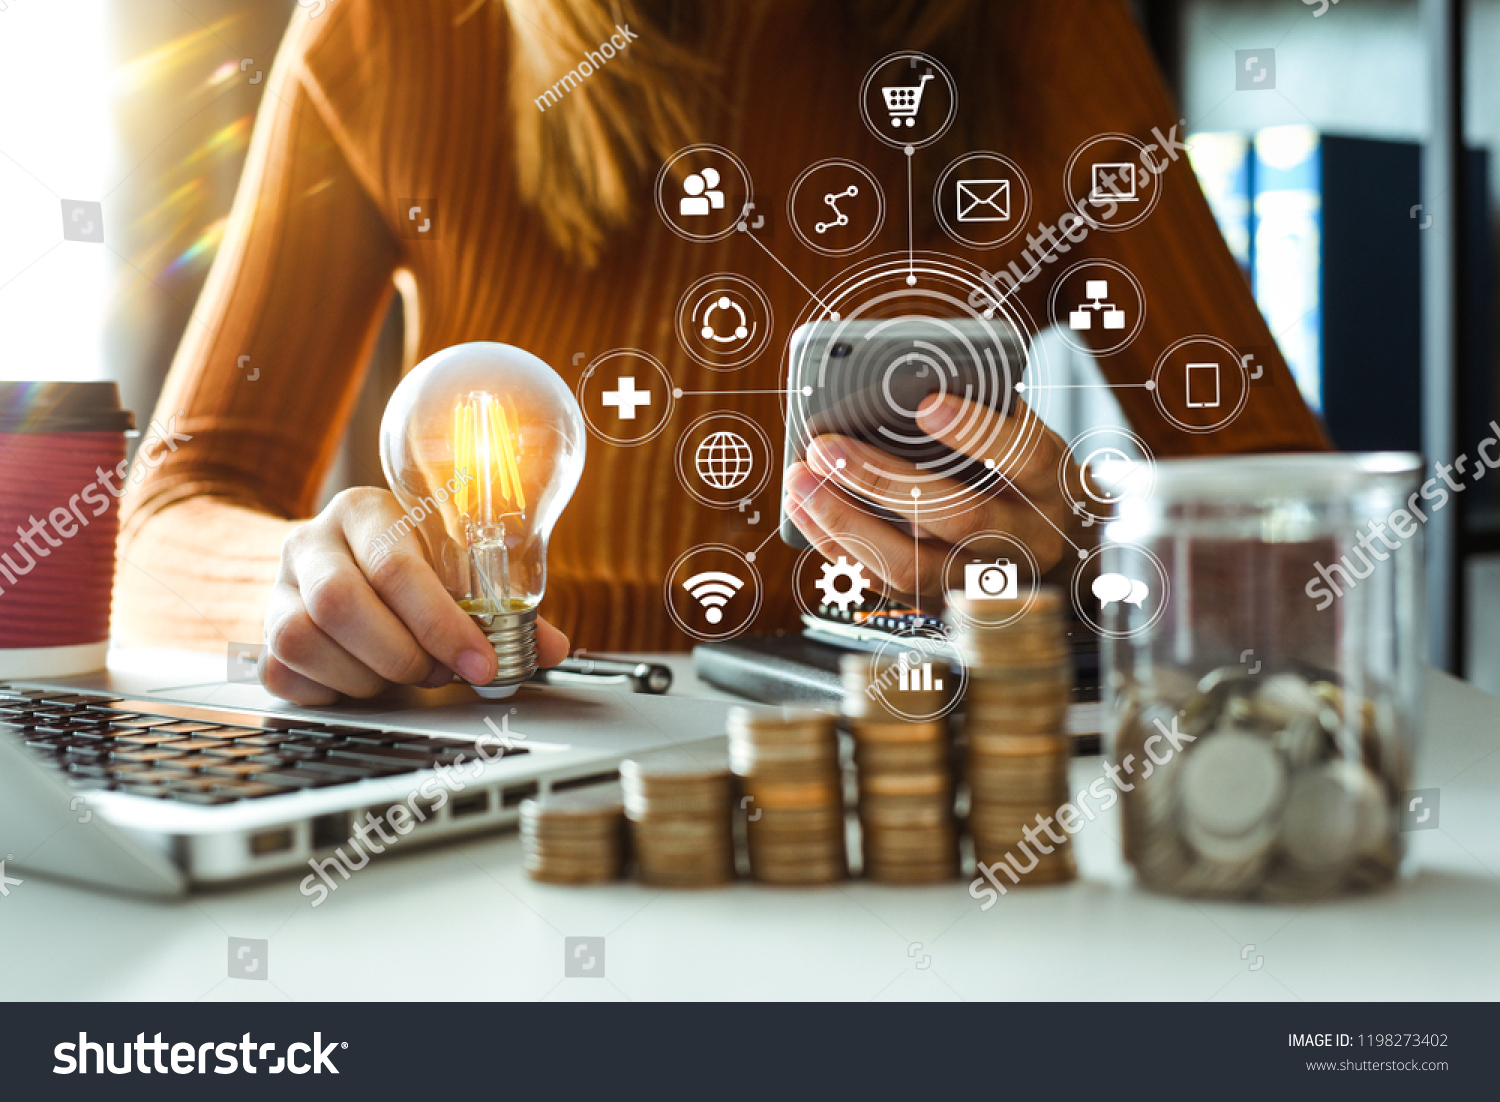 business woman using smartphone, tablet and holding light bulb, with using smartphone concept idea with innovation and creativity VR icon
 #1198273402